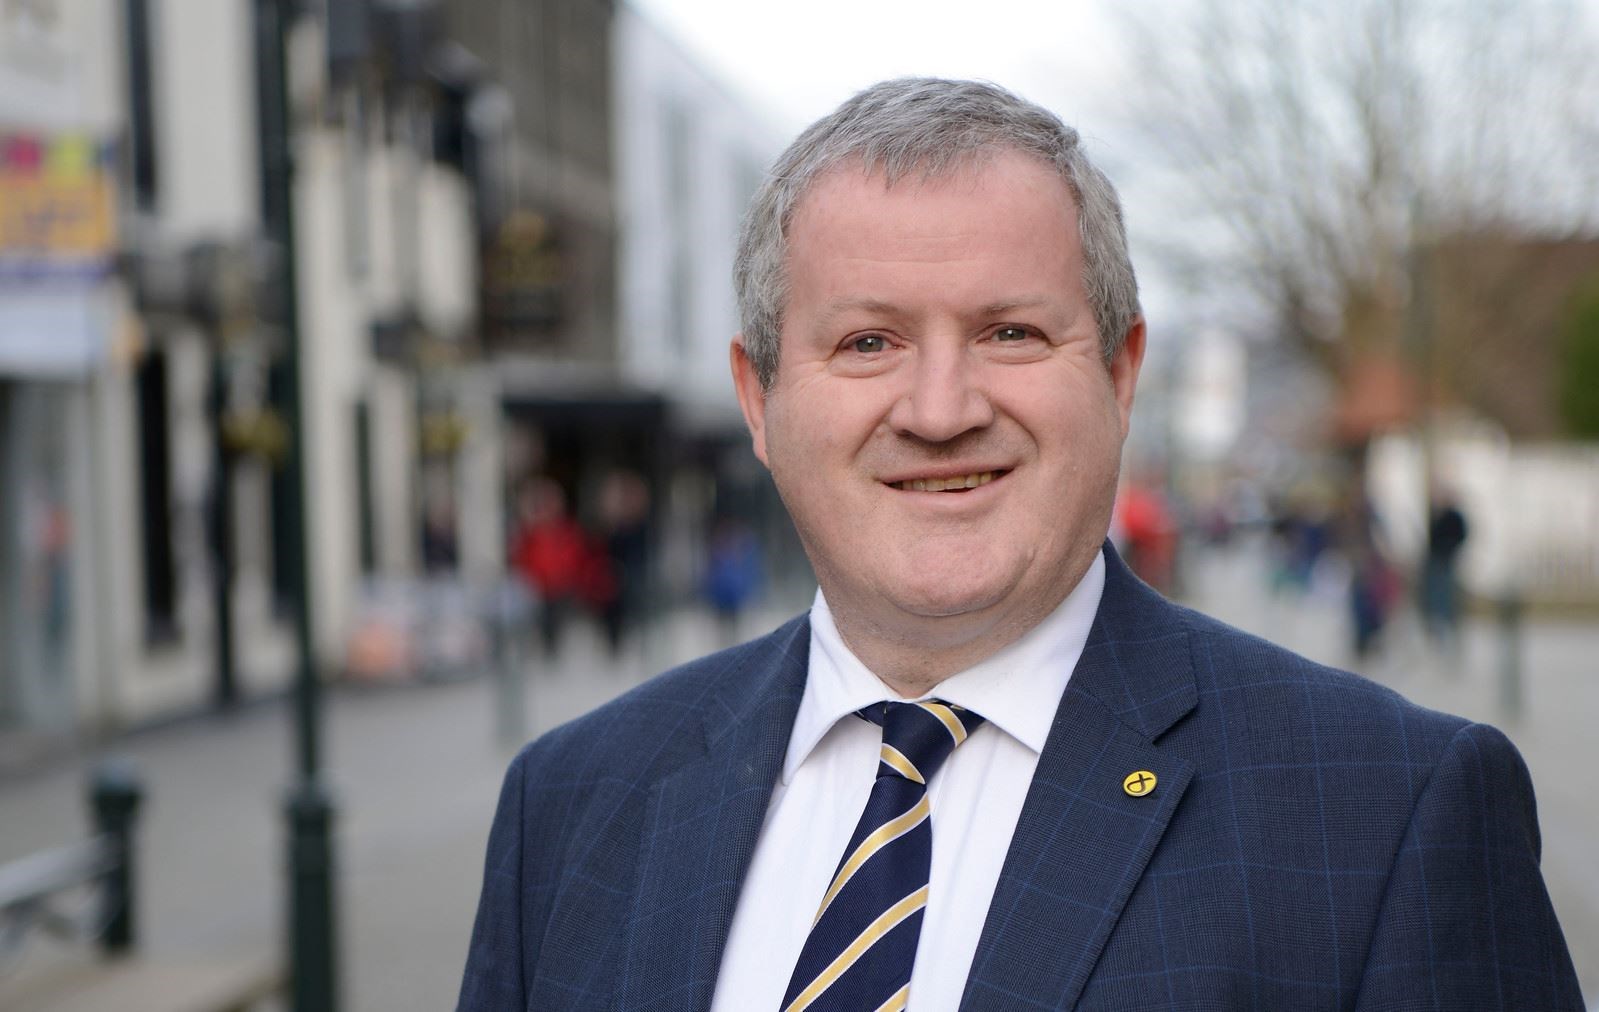 Local MP Ian Blackford: 'The only unwelcome visitor is Covid-19'.